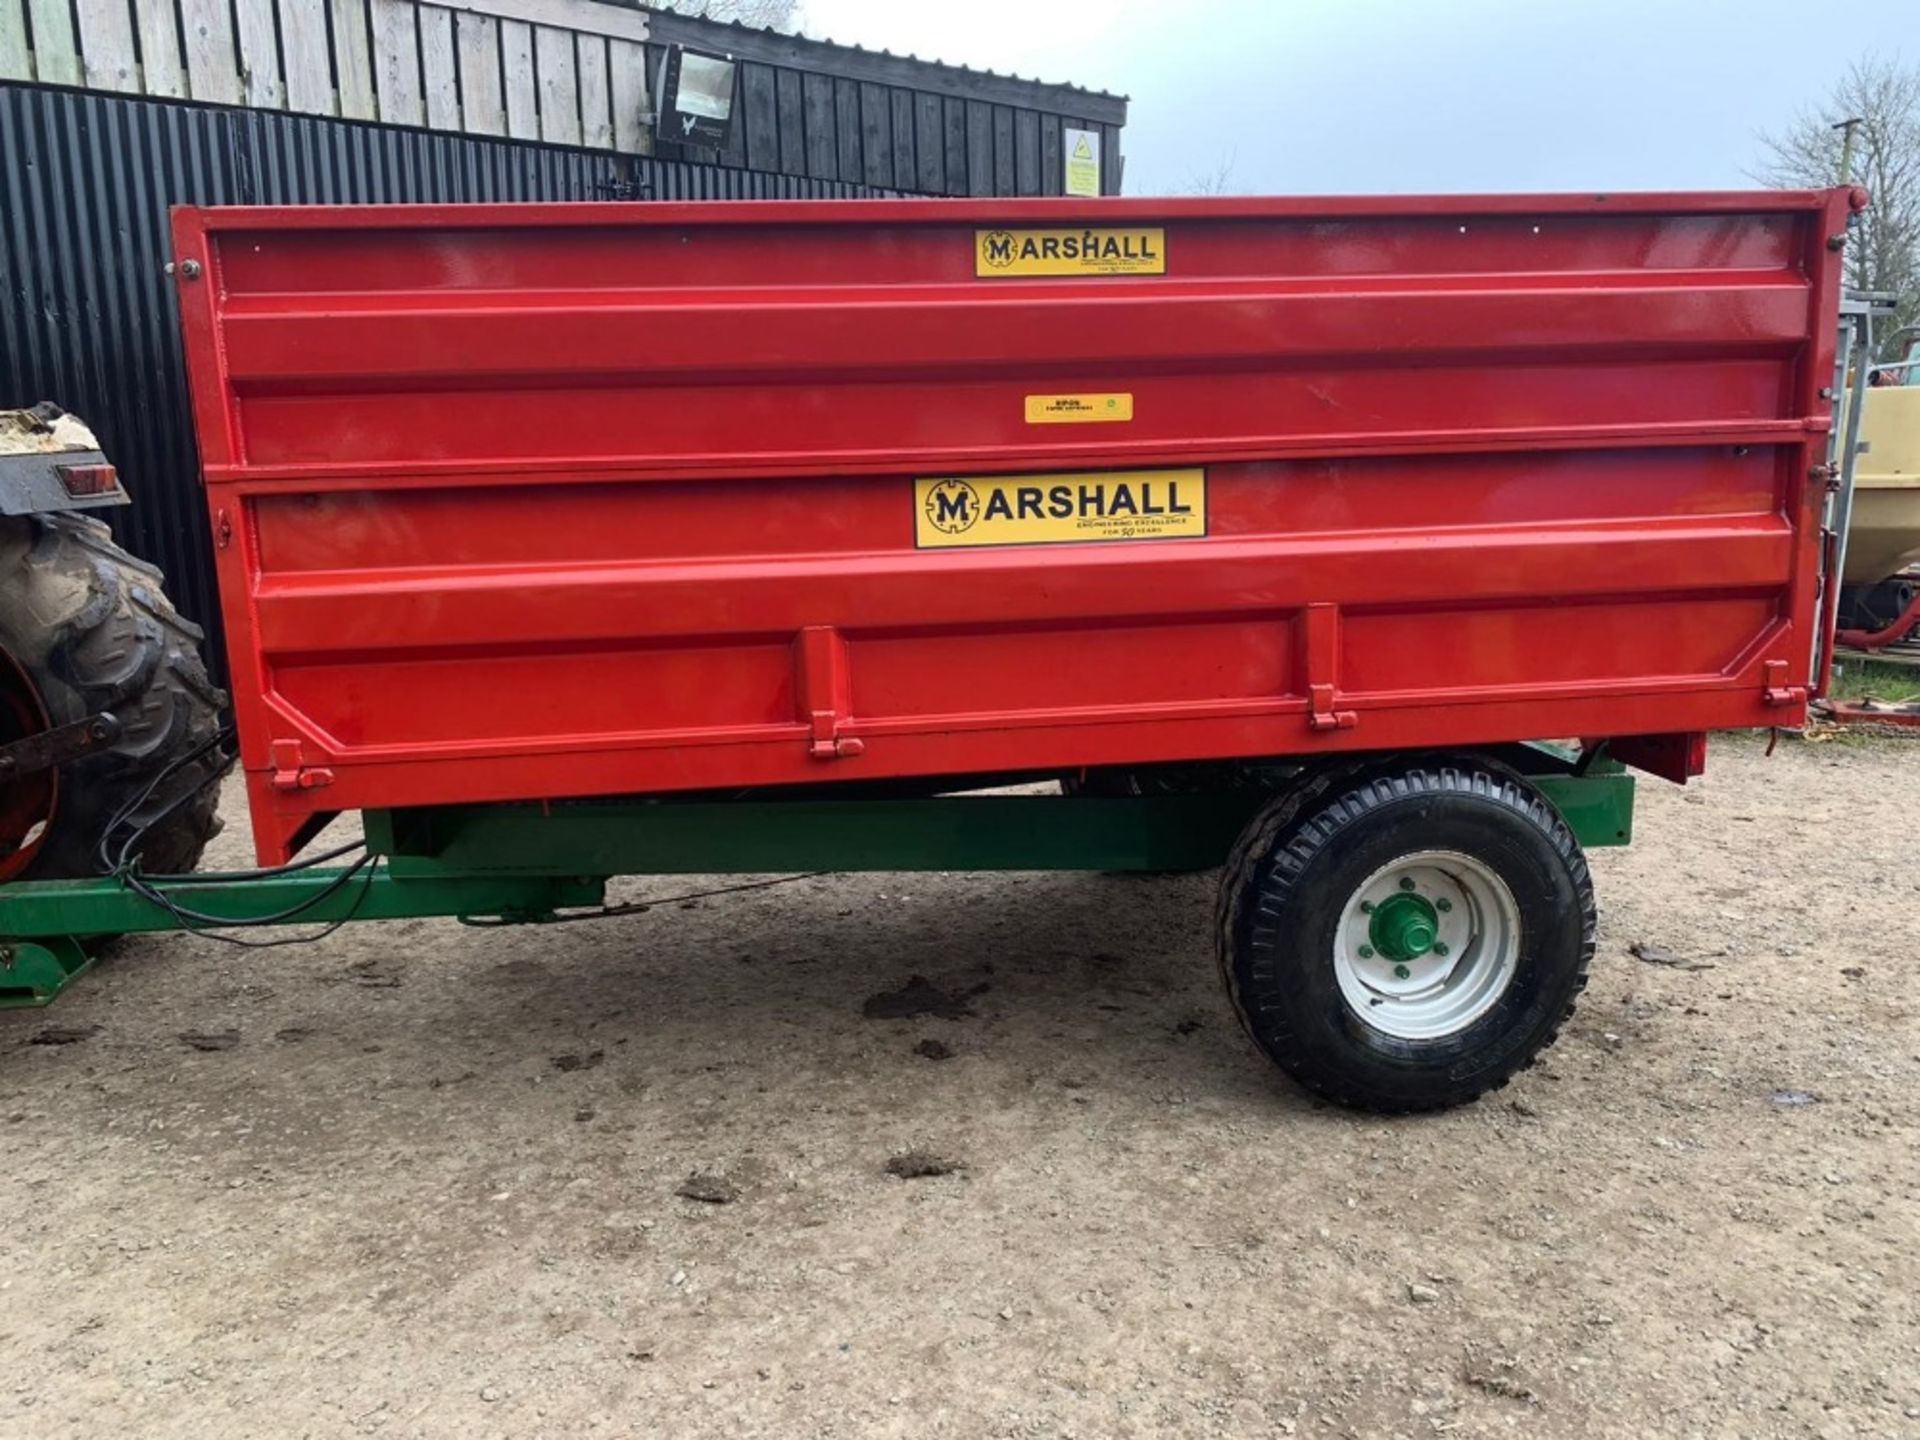 MARSHALL 5 TON TIPPING TRAILER - Image 2 of 4